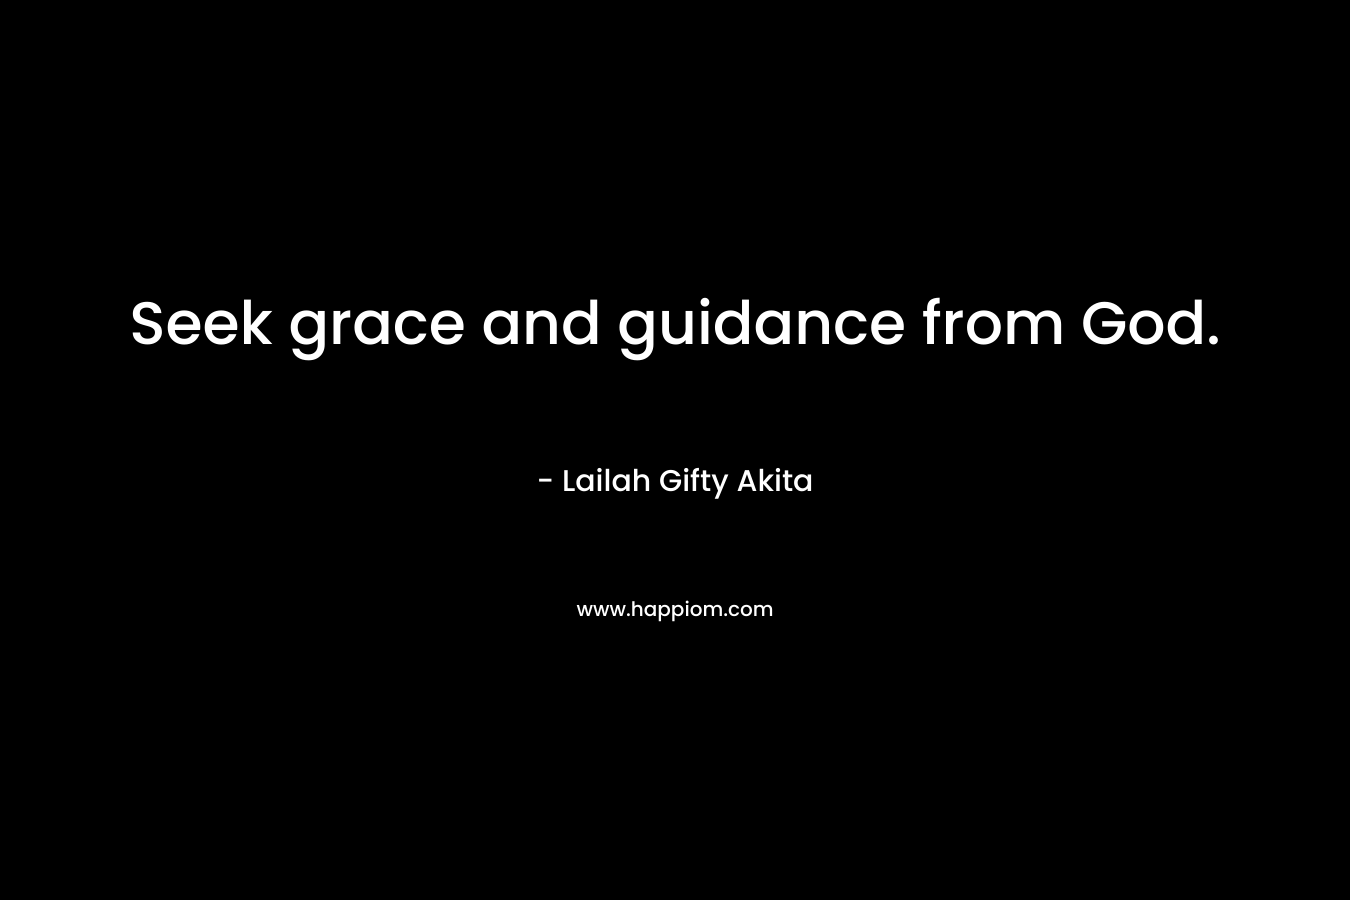 Seek grace and guidance from God. – Lailah Gifty Akita